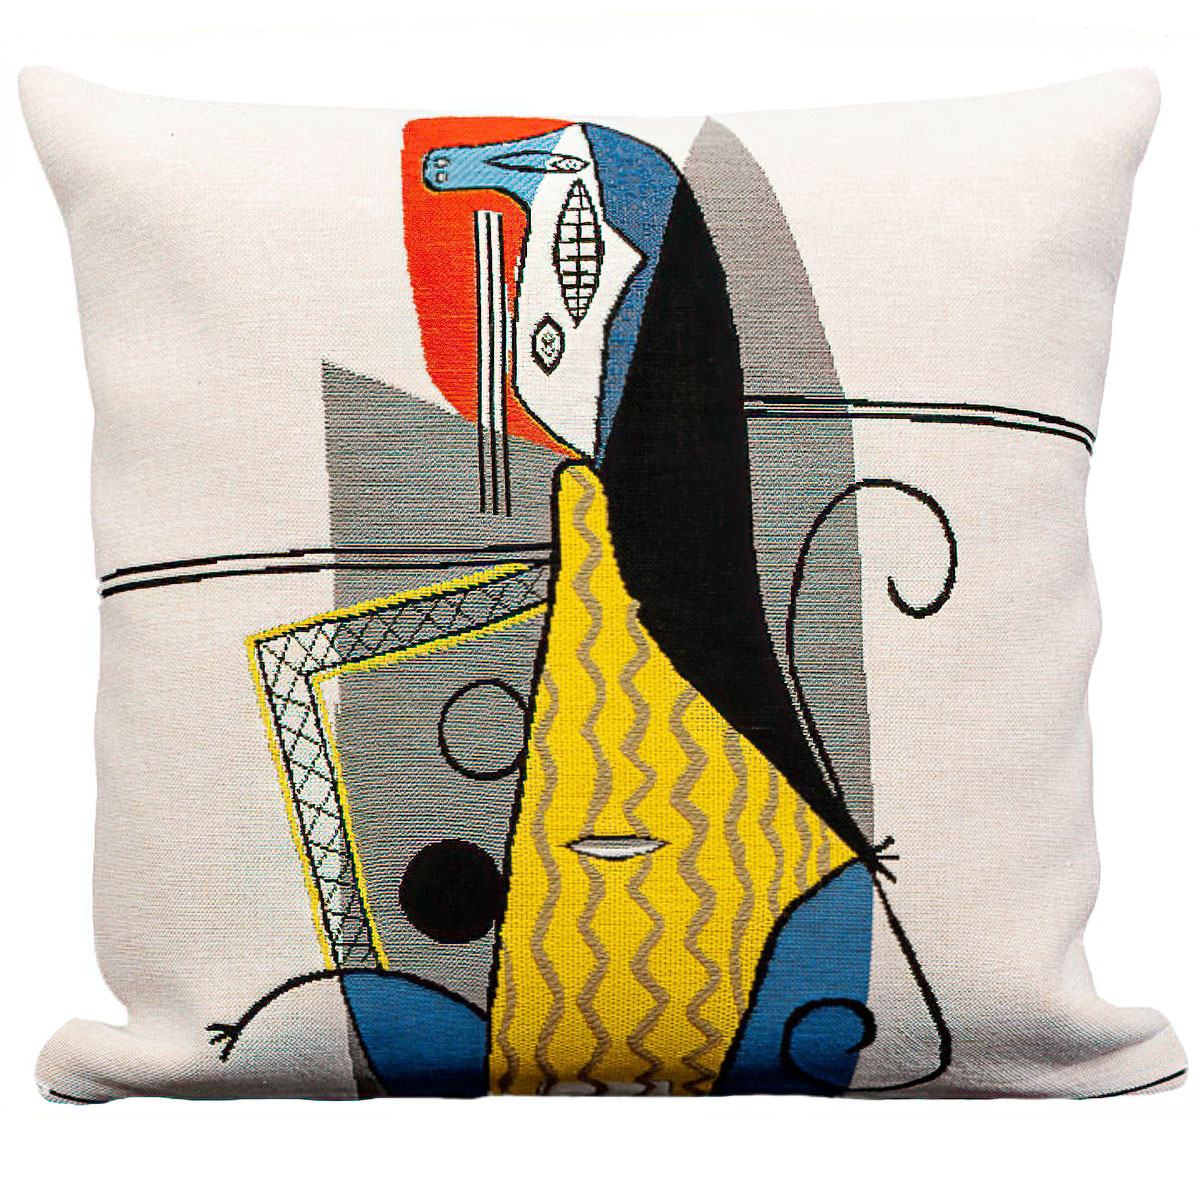 PICASSO WOMAN IN A CHAIR CUSHION COVER-